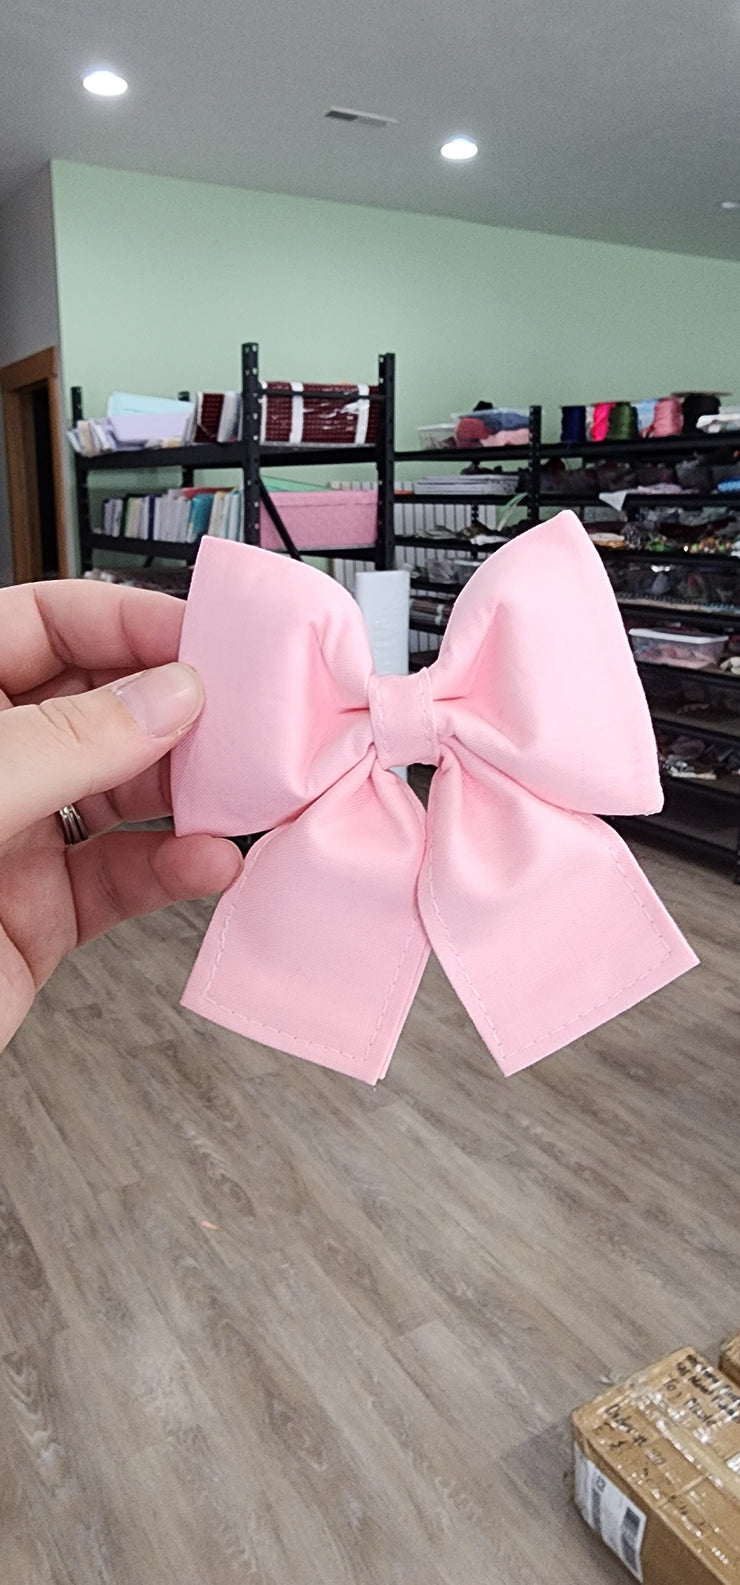 Minor Defect - Solid Blush Girly Bow - S/M